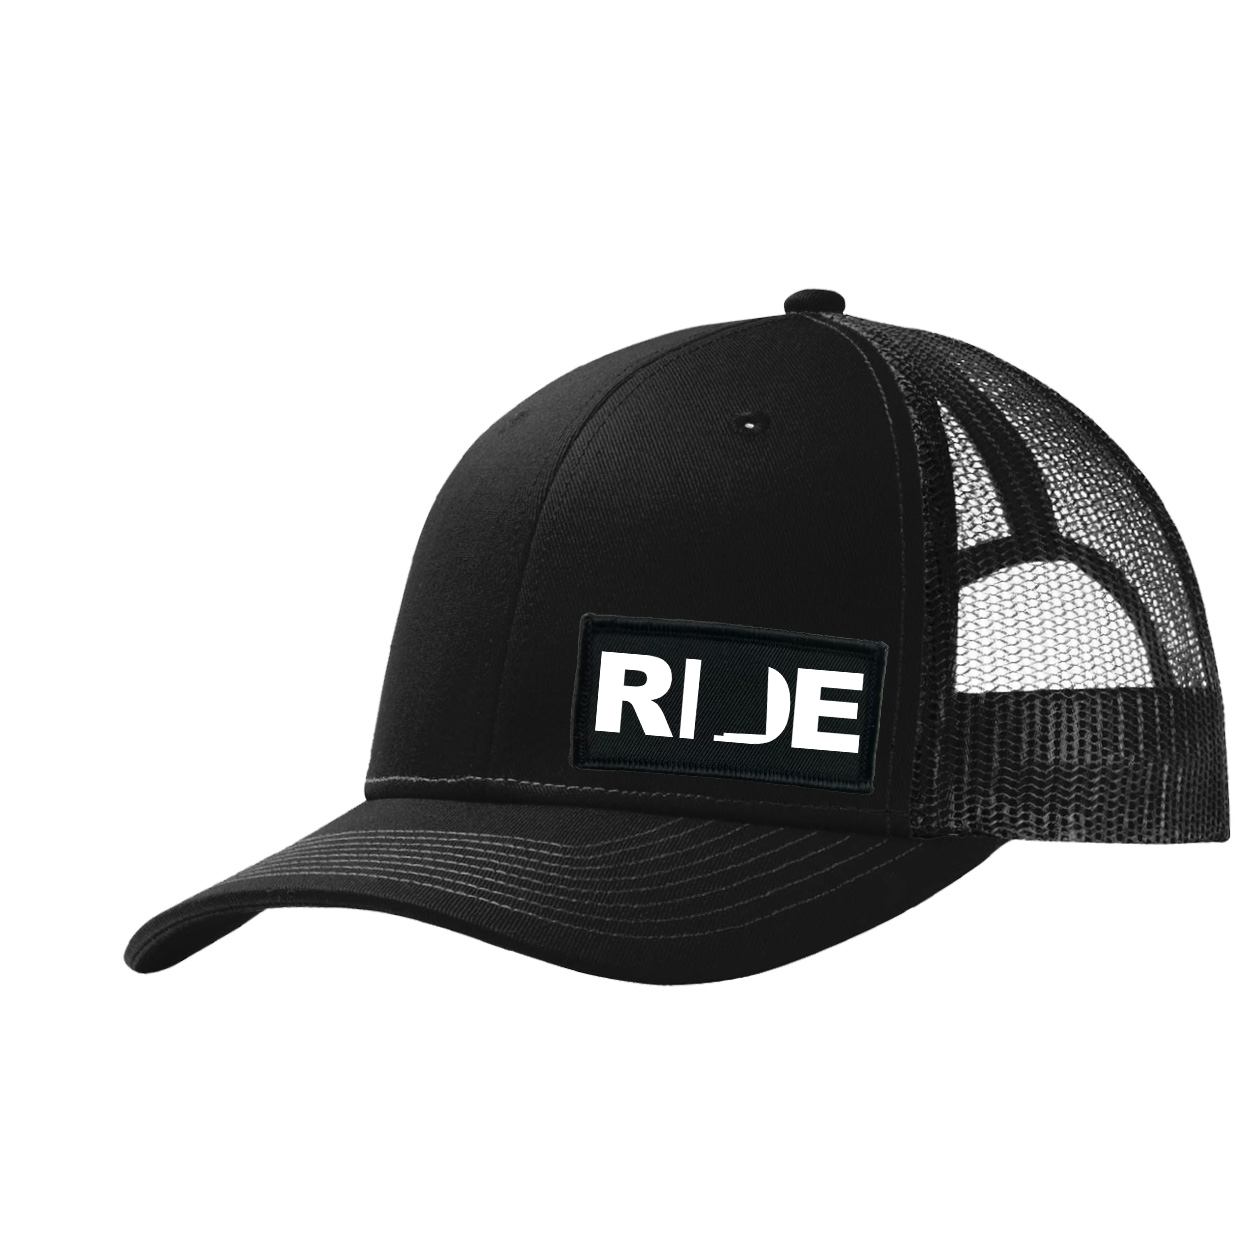 Ride New Mexico Night Out Woven Patch Snapback Trucker Hat Black (White Logo)